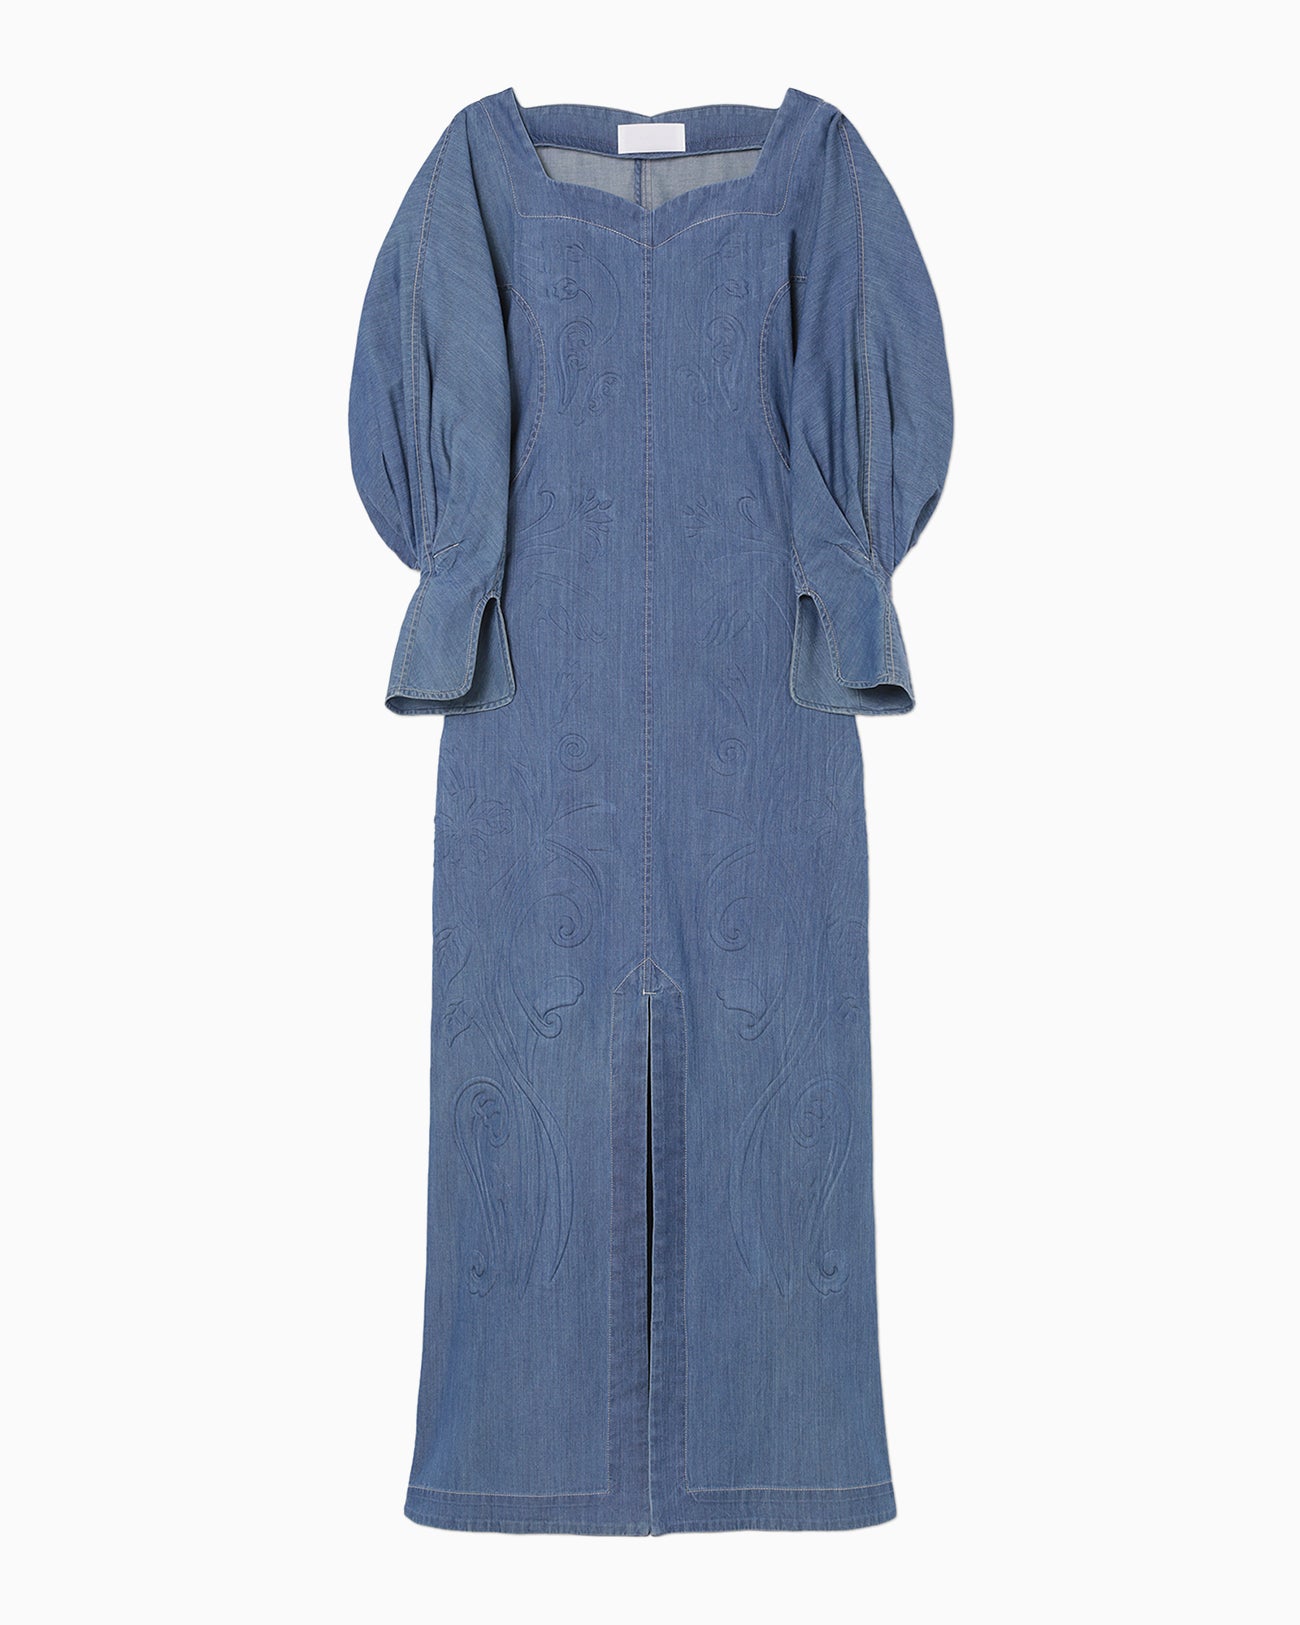 Floral Embossed Dungarees Square Neck Dress - blue